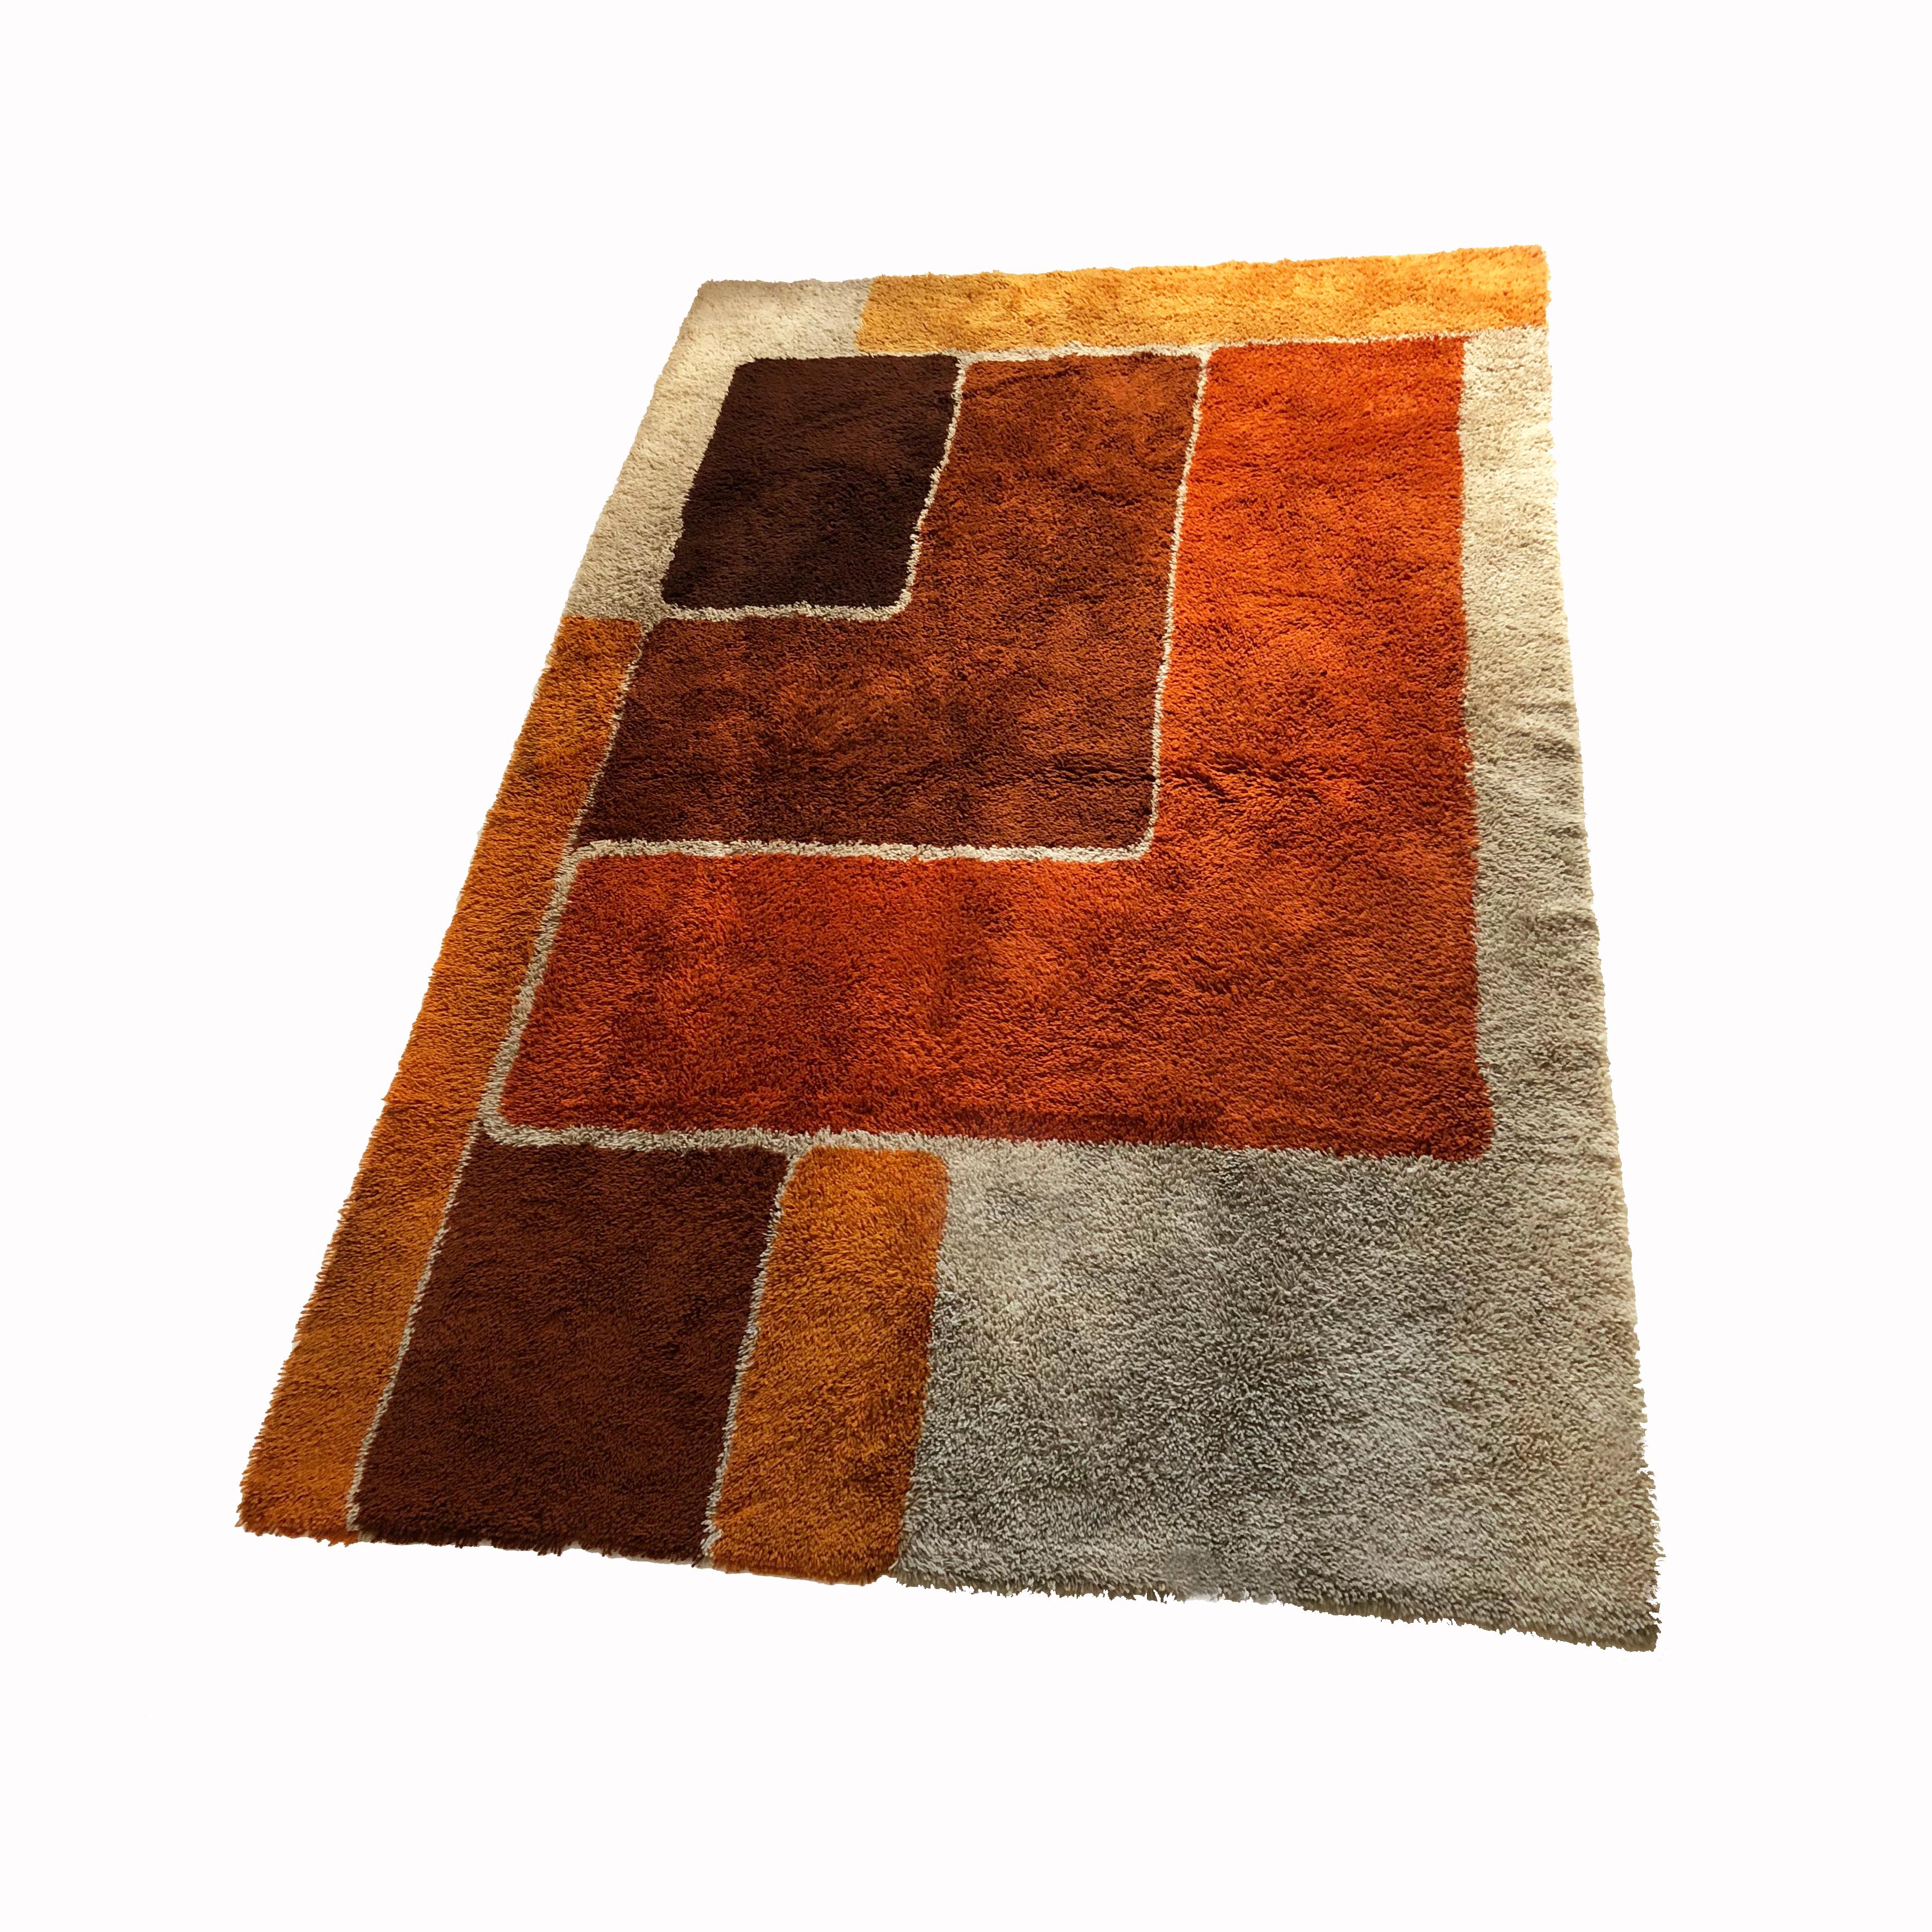 Article:

Original huge high pile rug


Decade:

1970s


Origin:

Netherlands


Producer:

Desso



Description:

This rug is a great example of 1970s pop art interior. Made in high quality weaving technique. This high quality high pile rug was